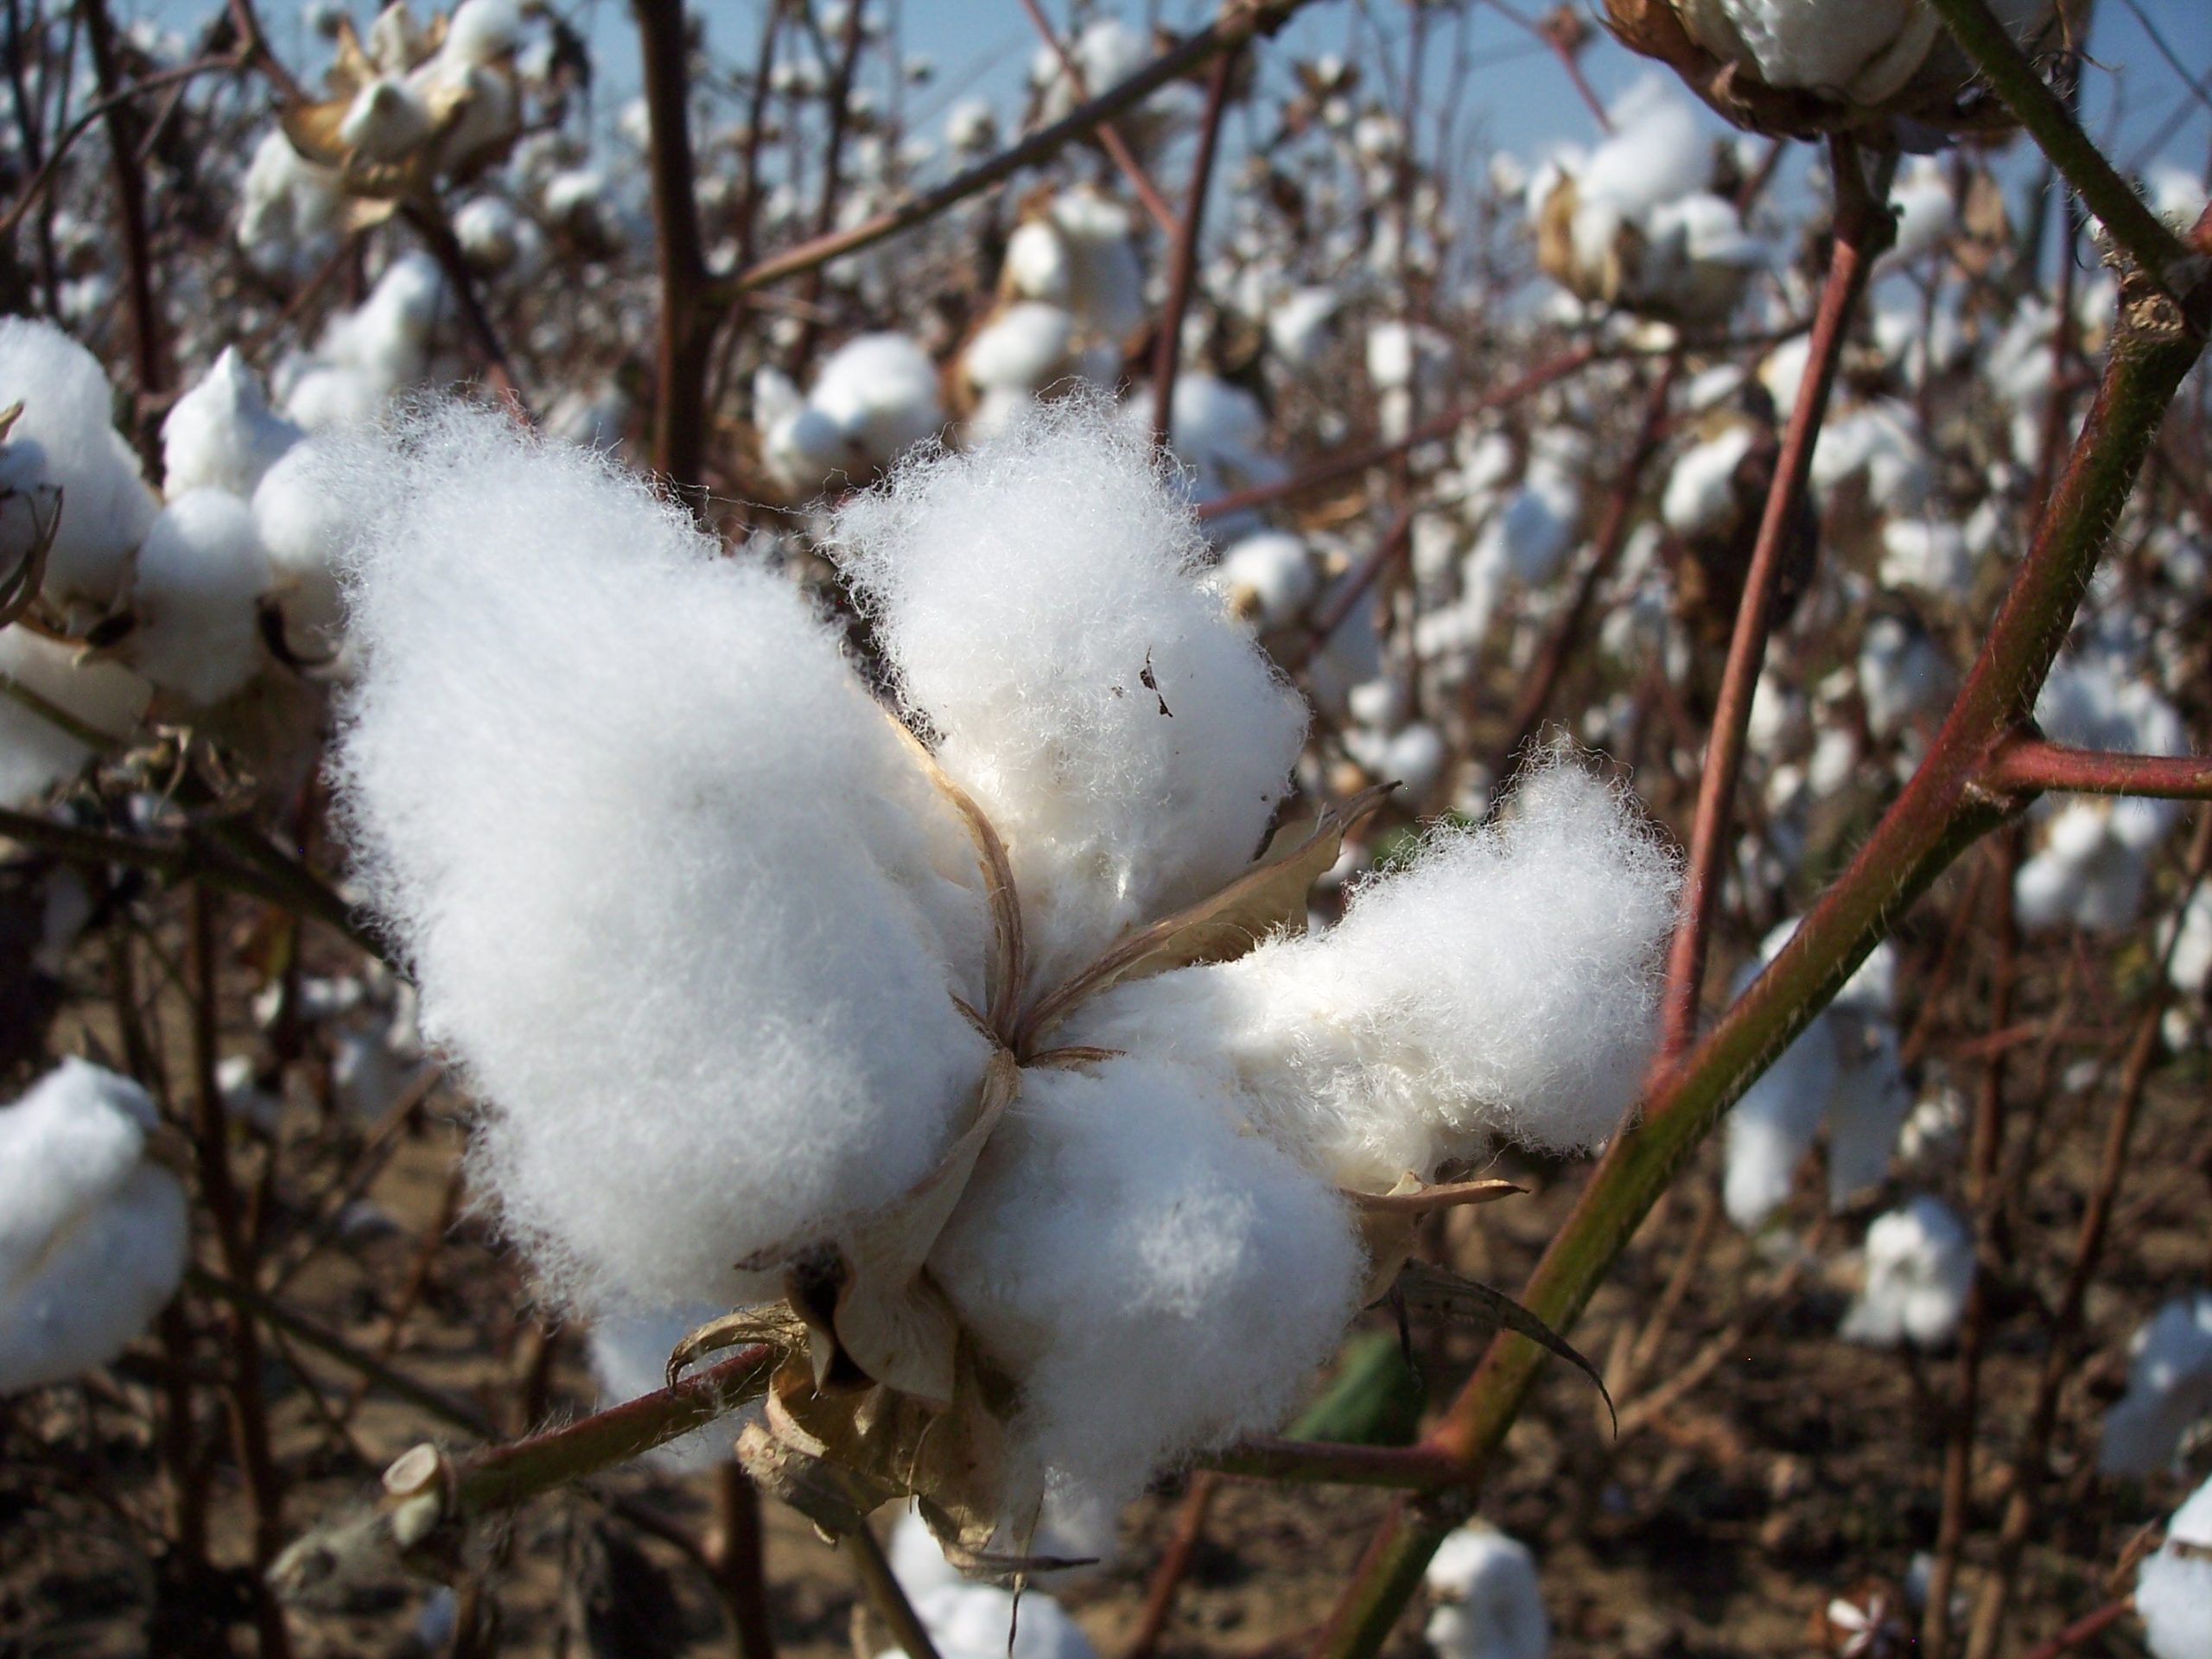 India’s Cotton Revolution: Outcomes and Insights